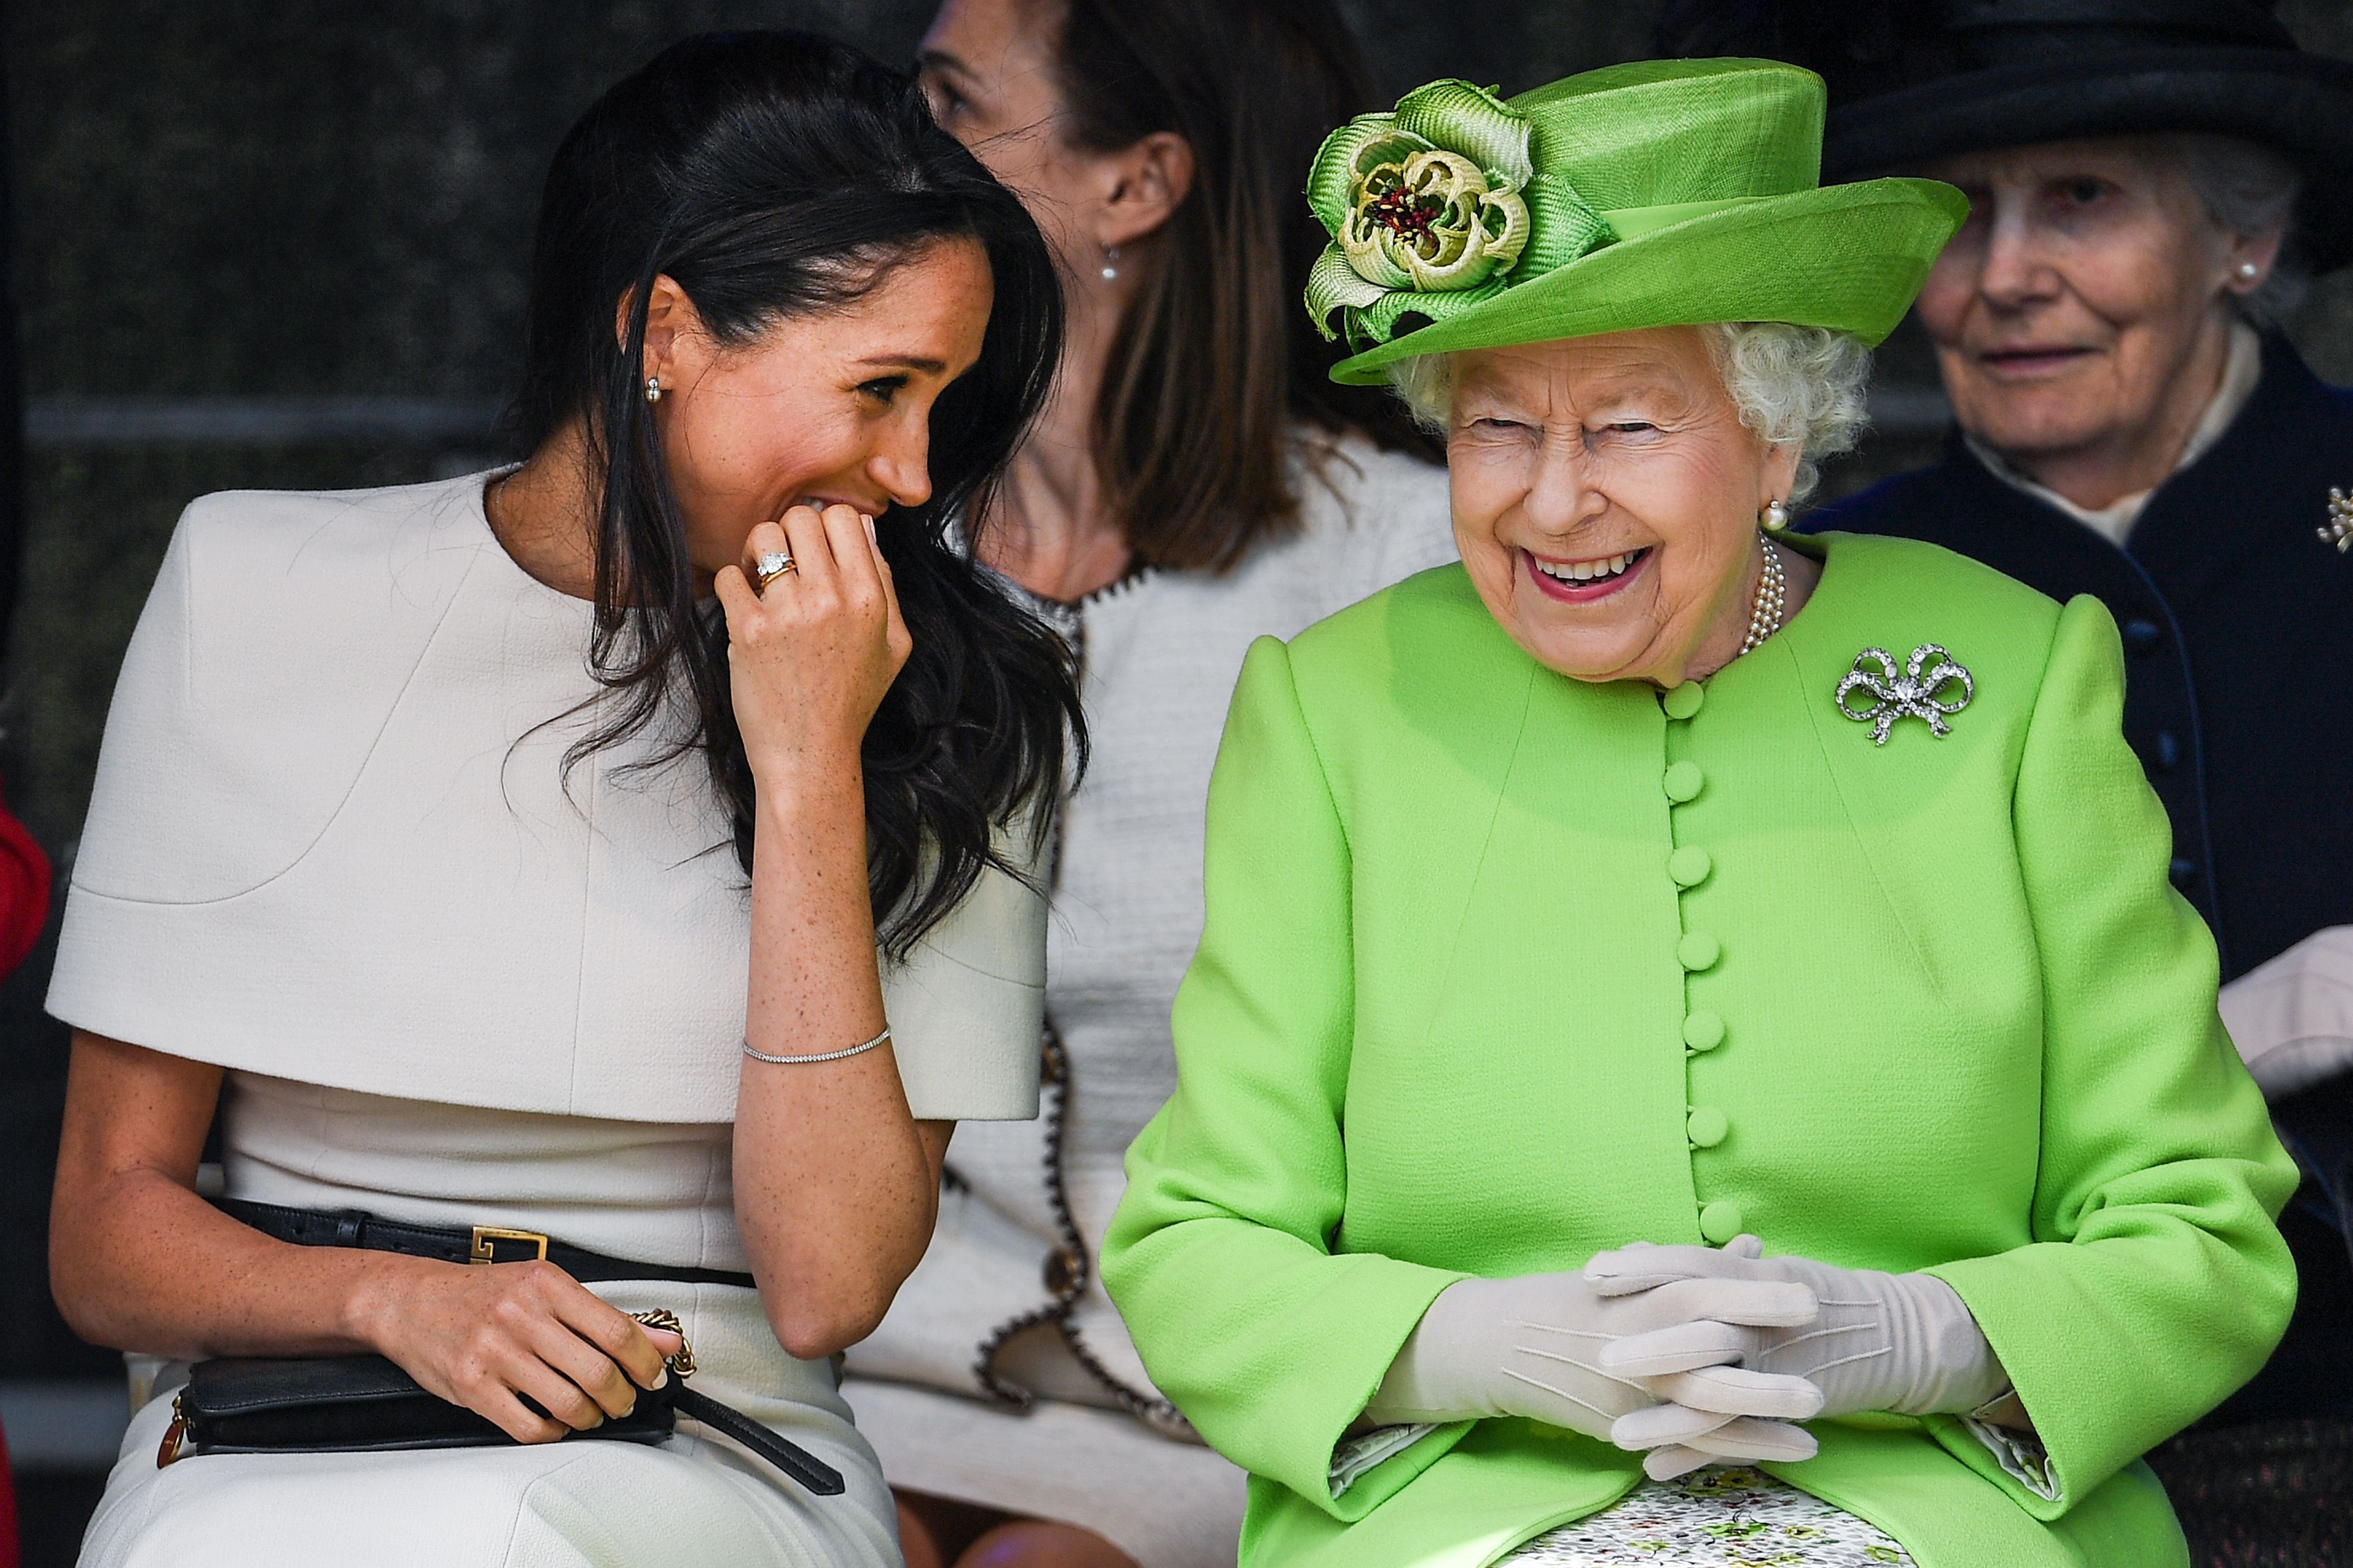 queen-elizabeth-ii-sitts-and-laughs-with-meghan-duchess-of-news-photo-974106742-1547074636.jpg